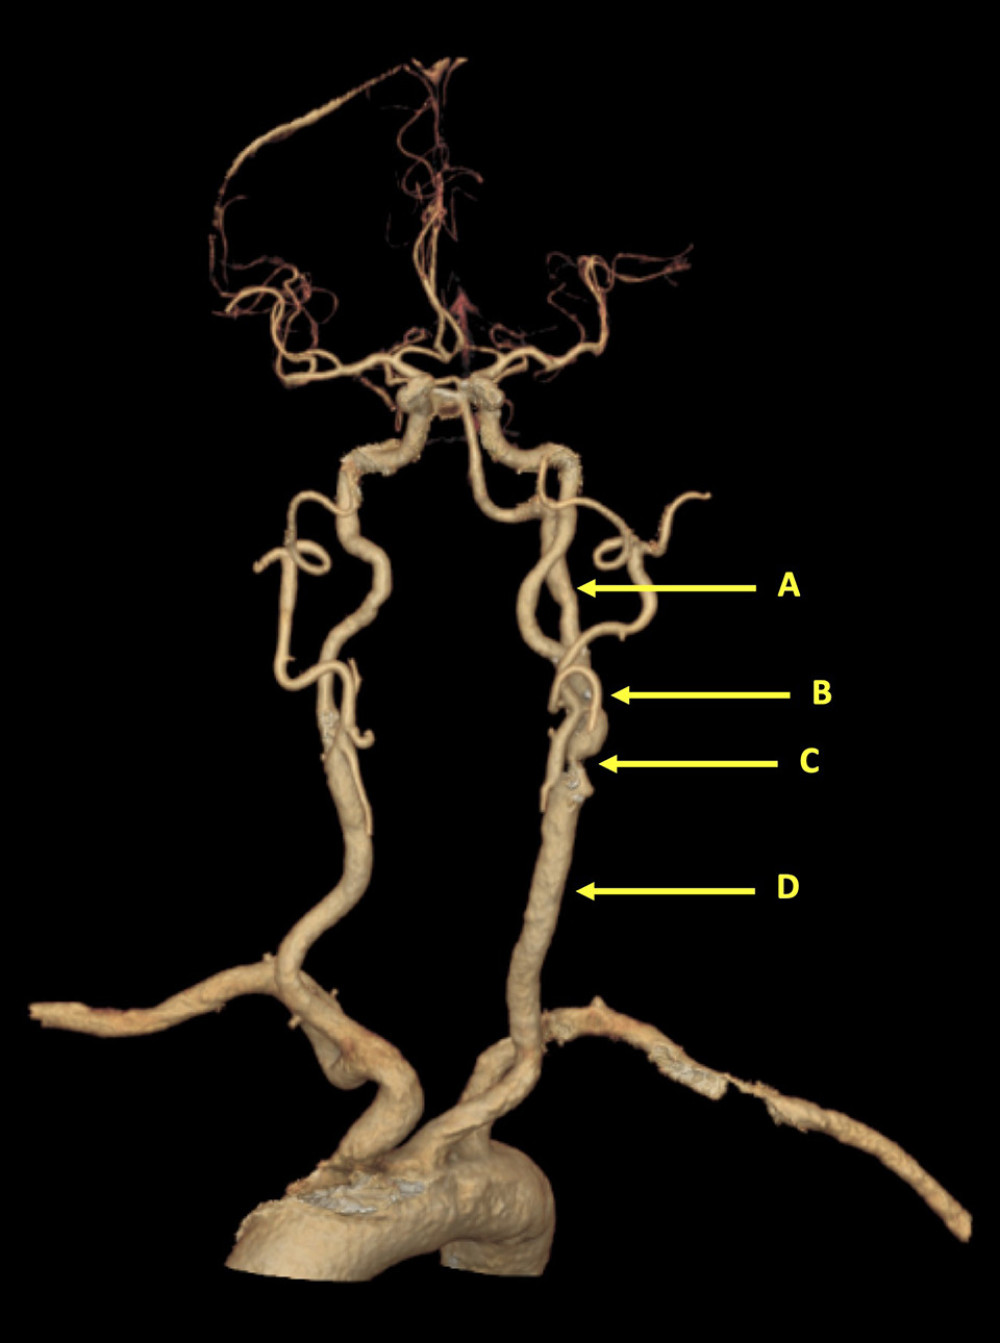 A 3-dimentional reconstruction of the Circle of Willis anatomy illustrating the persistent primitive hypoglossal artery. A) Left persistent patent hypoglossal artery (PPHA); B) left internal carotid artery; C) lesion at the left common carotid artery bifurcation; and D) left common carotid artery.